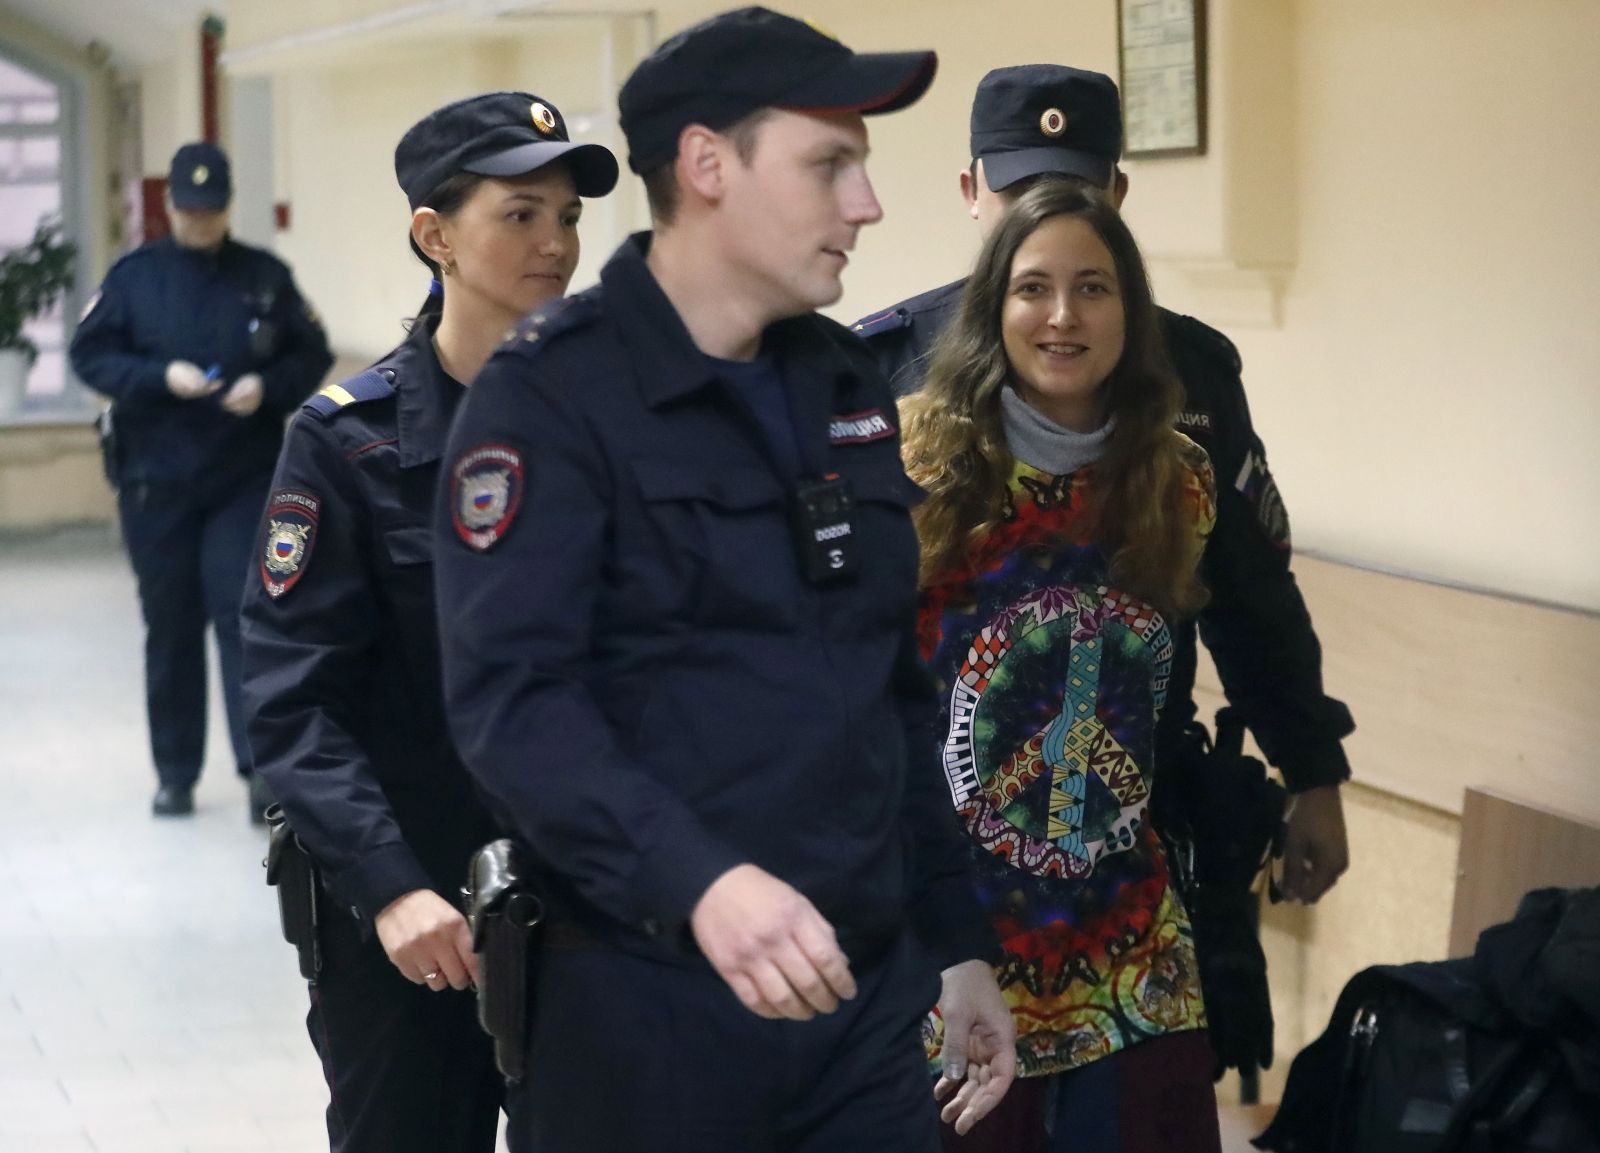 epa10973095 Russian artist and musician, 33-years old Sasha Skochilenko (R), is escorted by police officers to the courtroom for a hearing in the Vasileostrovsky district court in St. Petersburg, Russia, 13 November 2023. Sasha Skochilenko was arrested in April 2022 and faces charges of spreading false information about the army after replacing supermarket price tags with slogans protesting against Russia's military operation in Ukraine.  EPA/ANATOLY MALTSEV